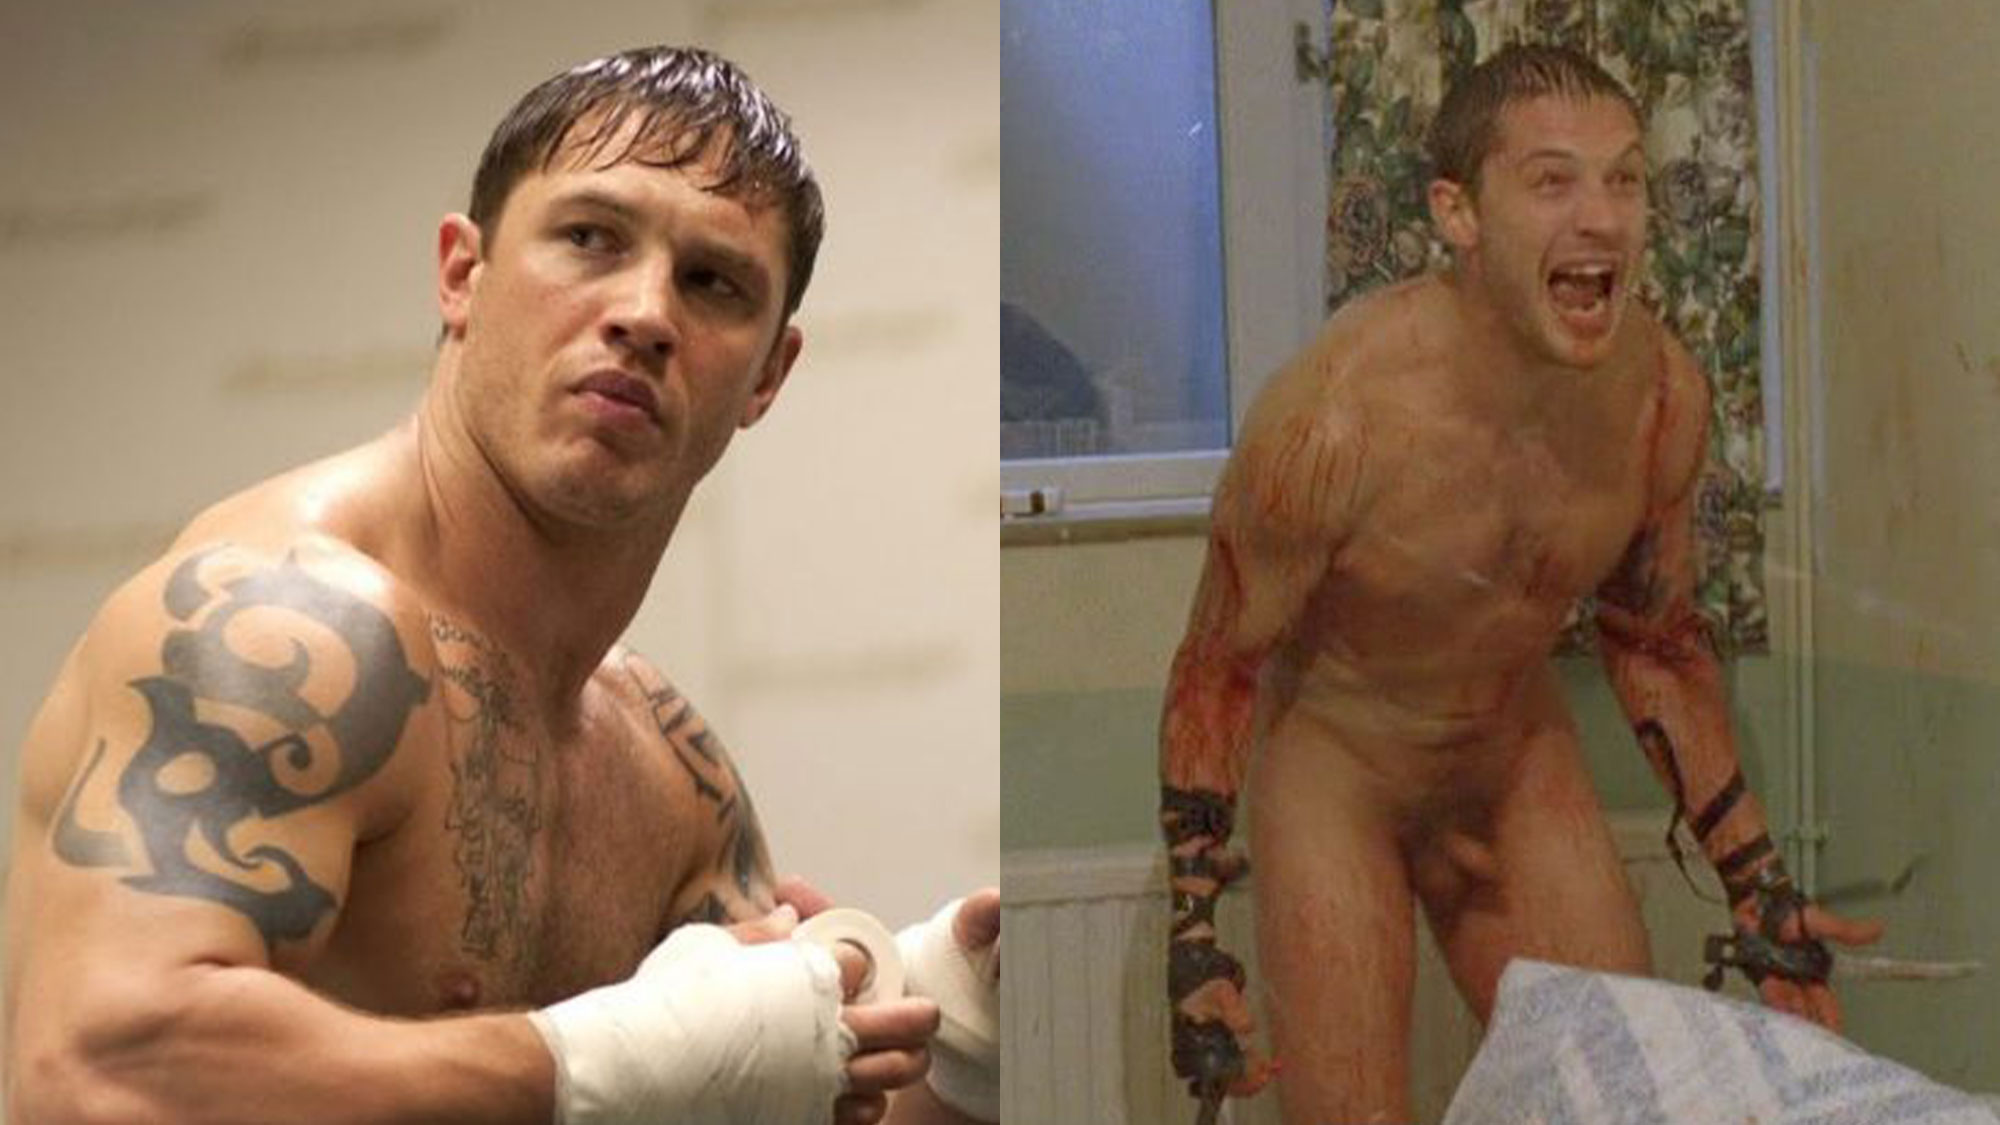 Tom hardy has a small dick